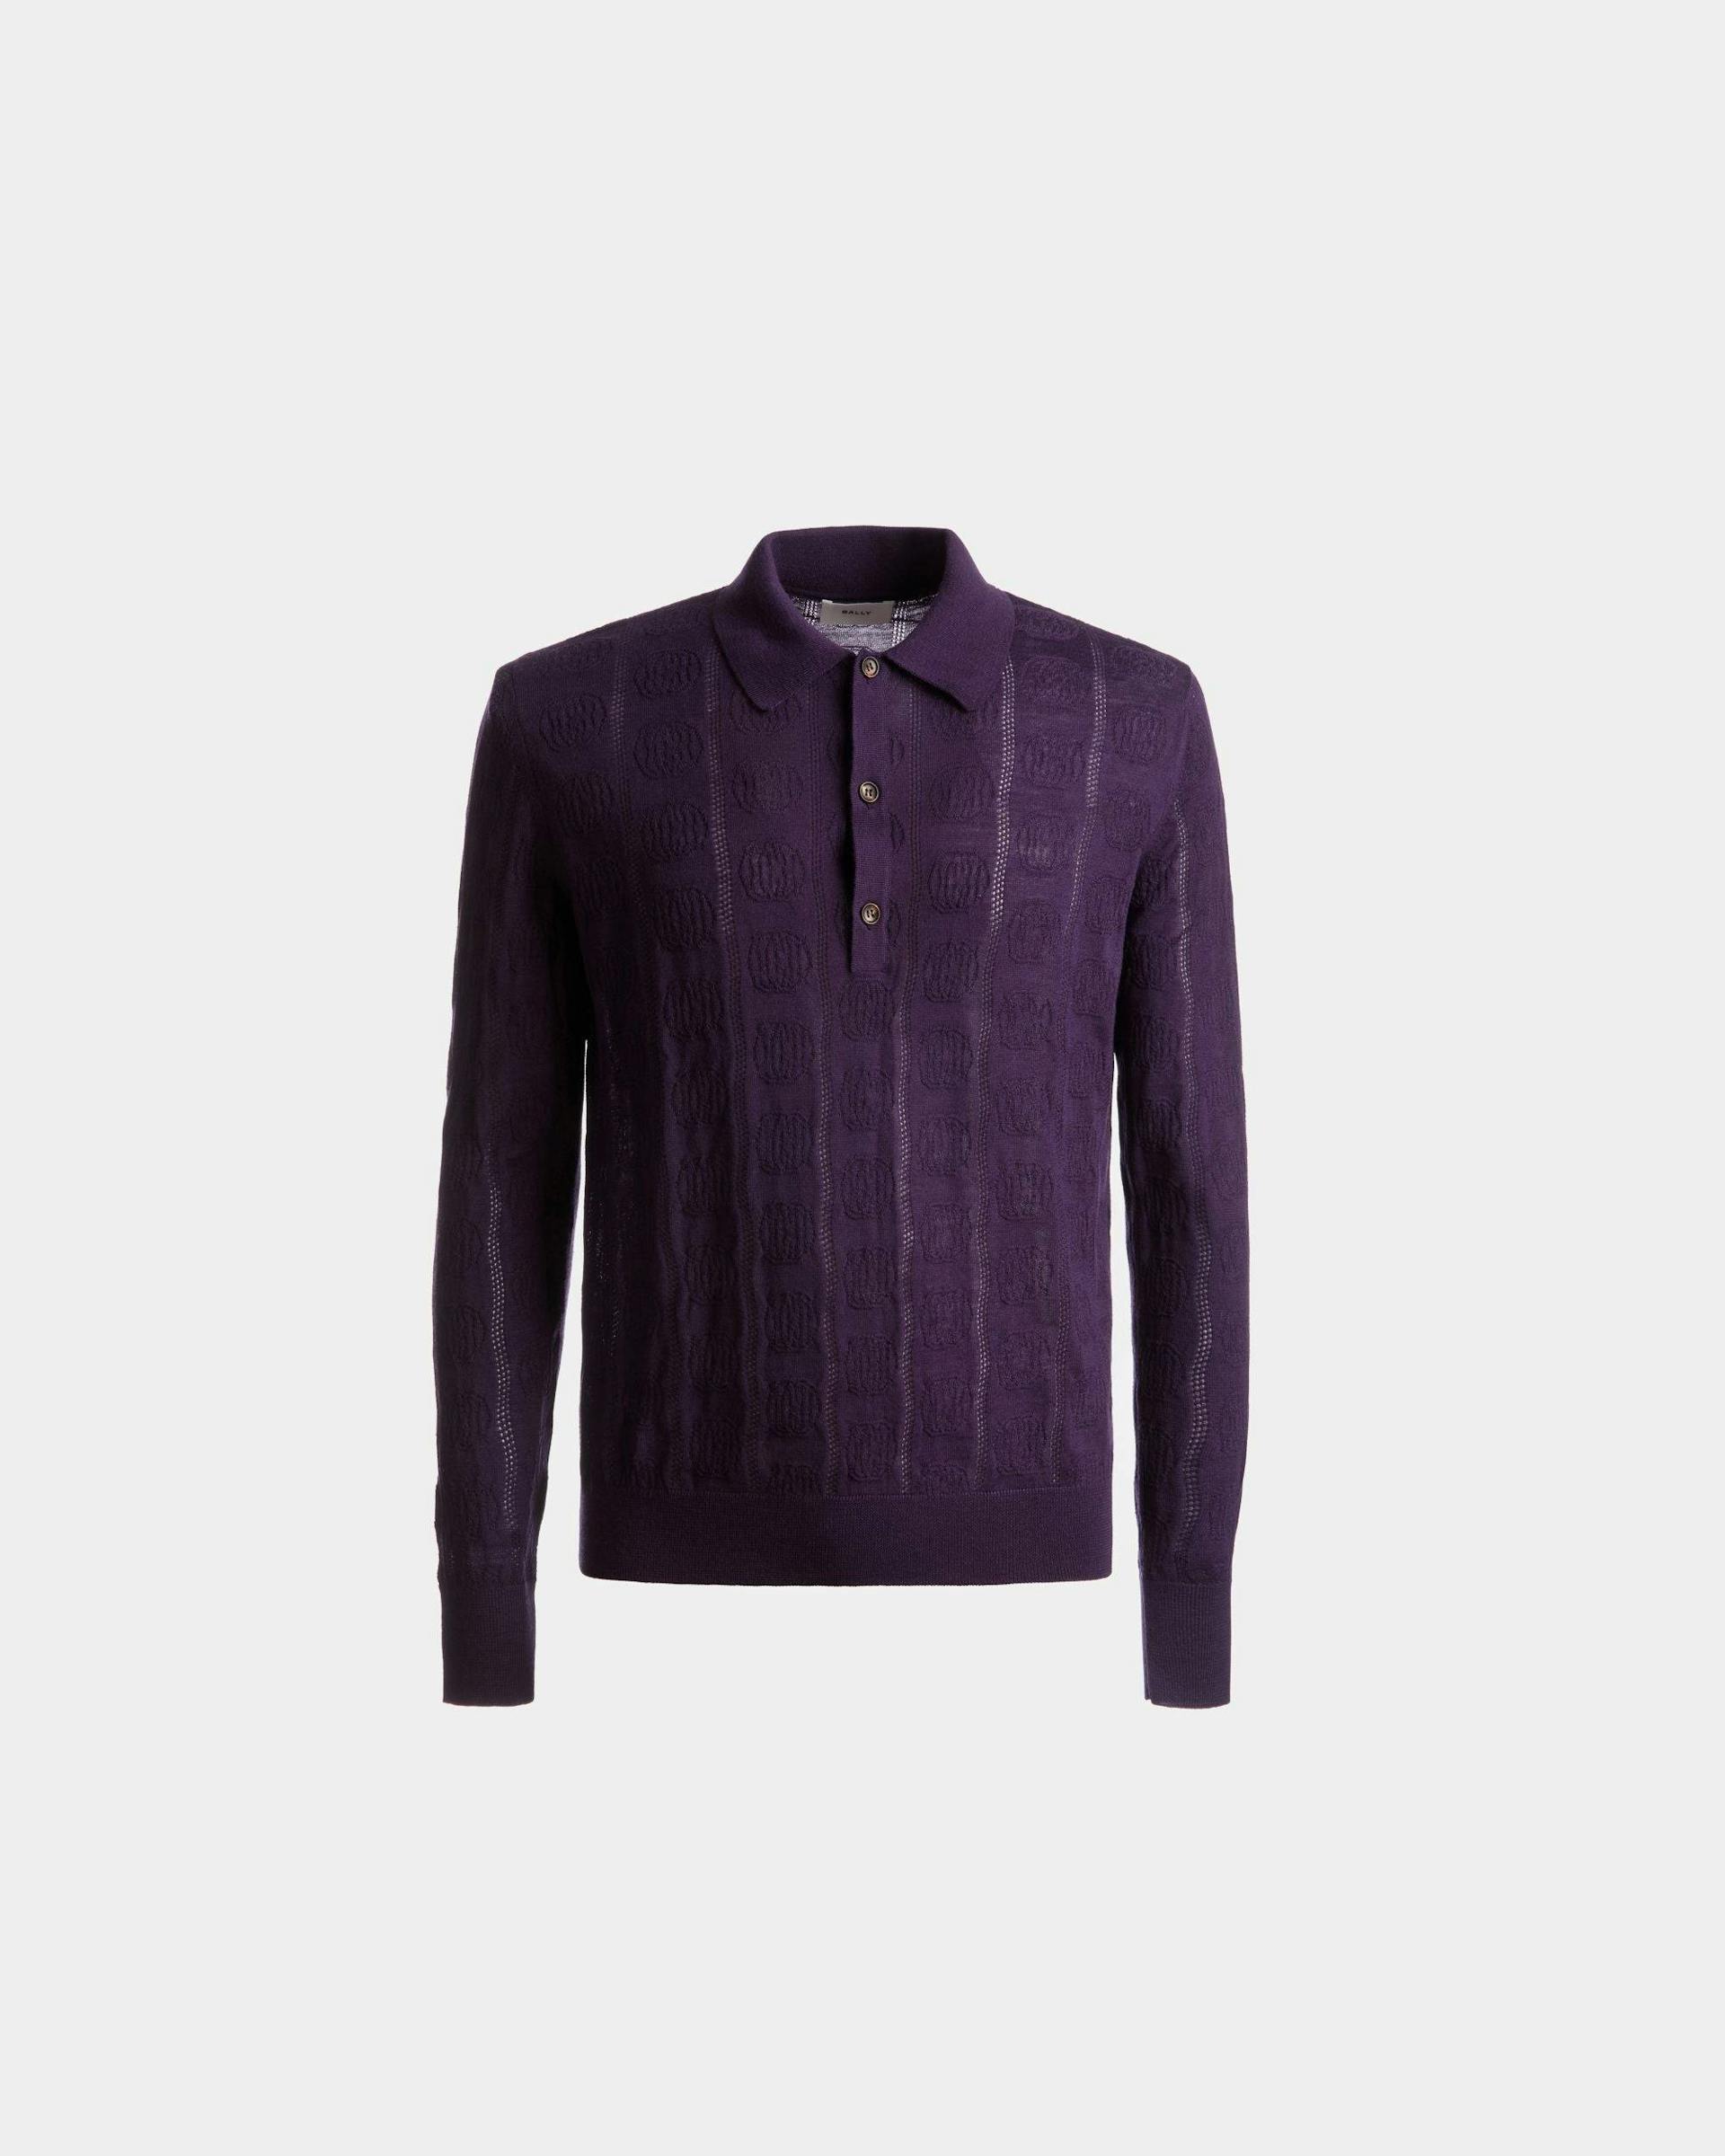 Men's Long Sleeve Polo In Orchid Wool | Bally | Still Life Front